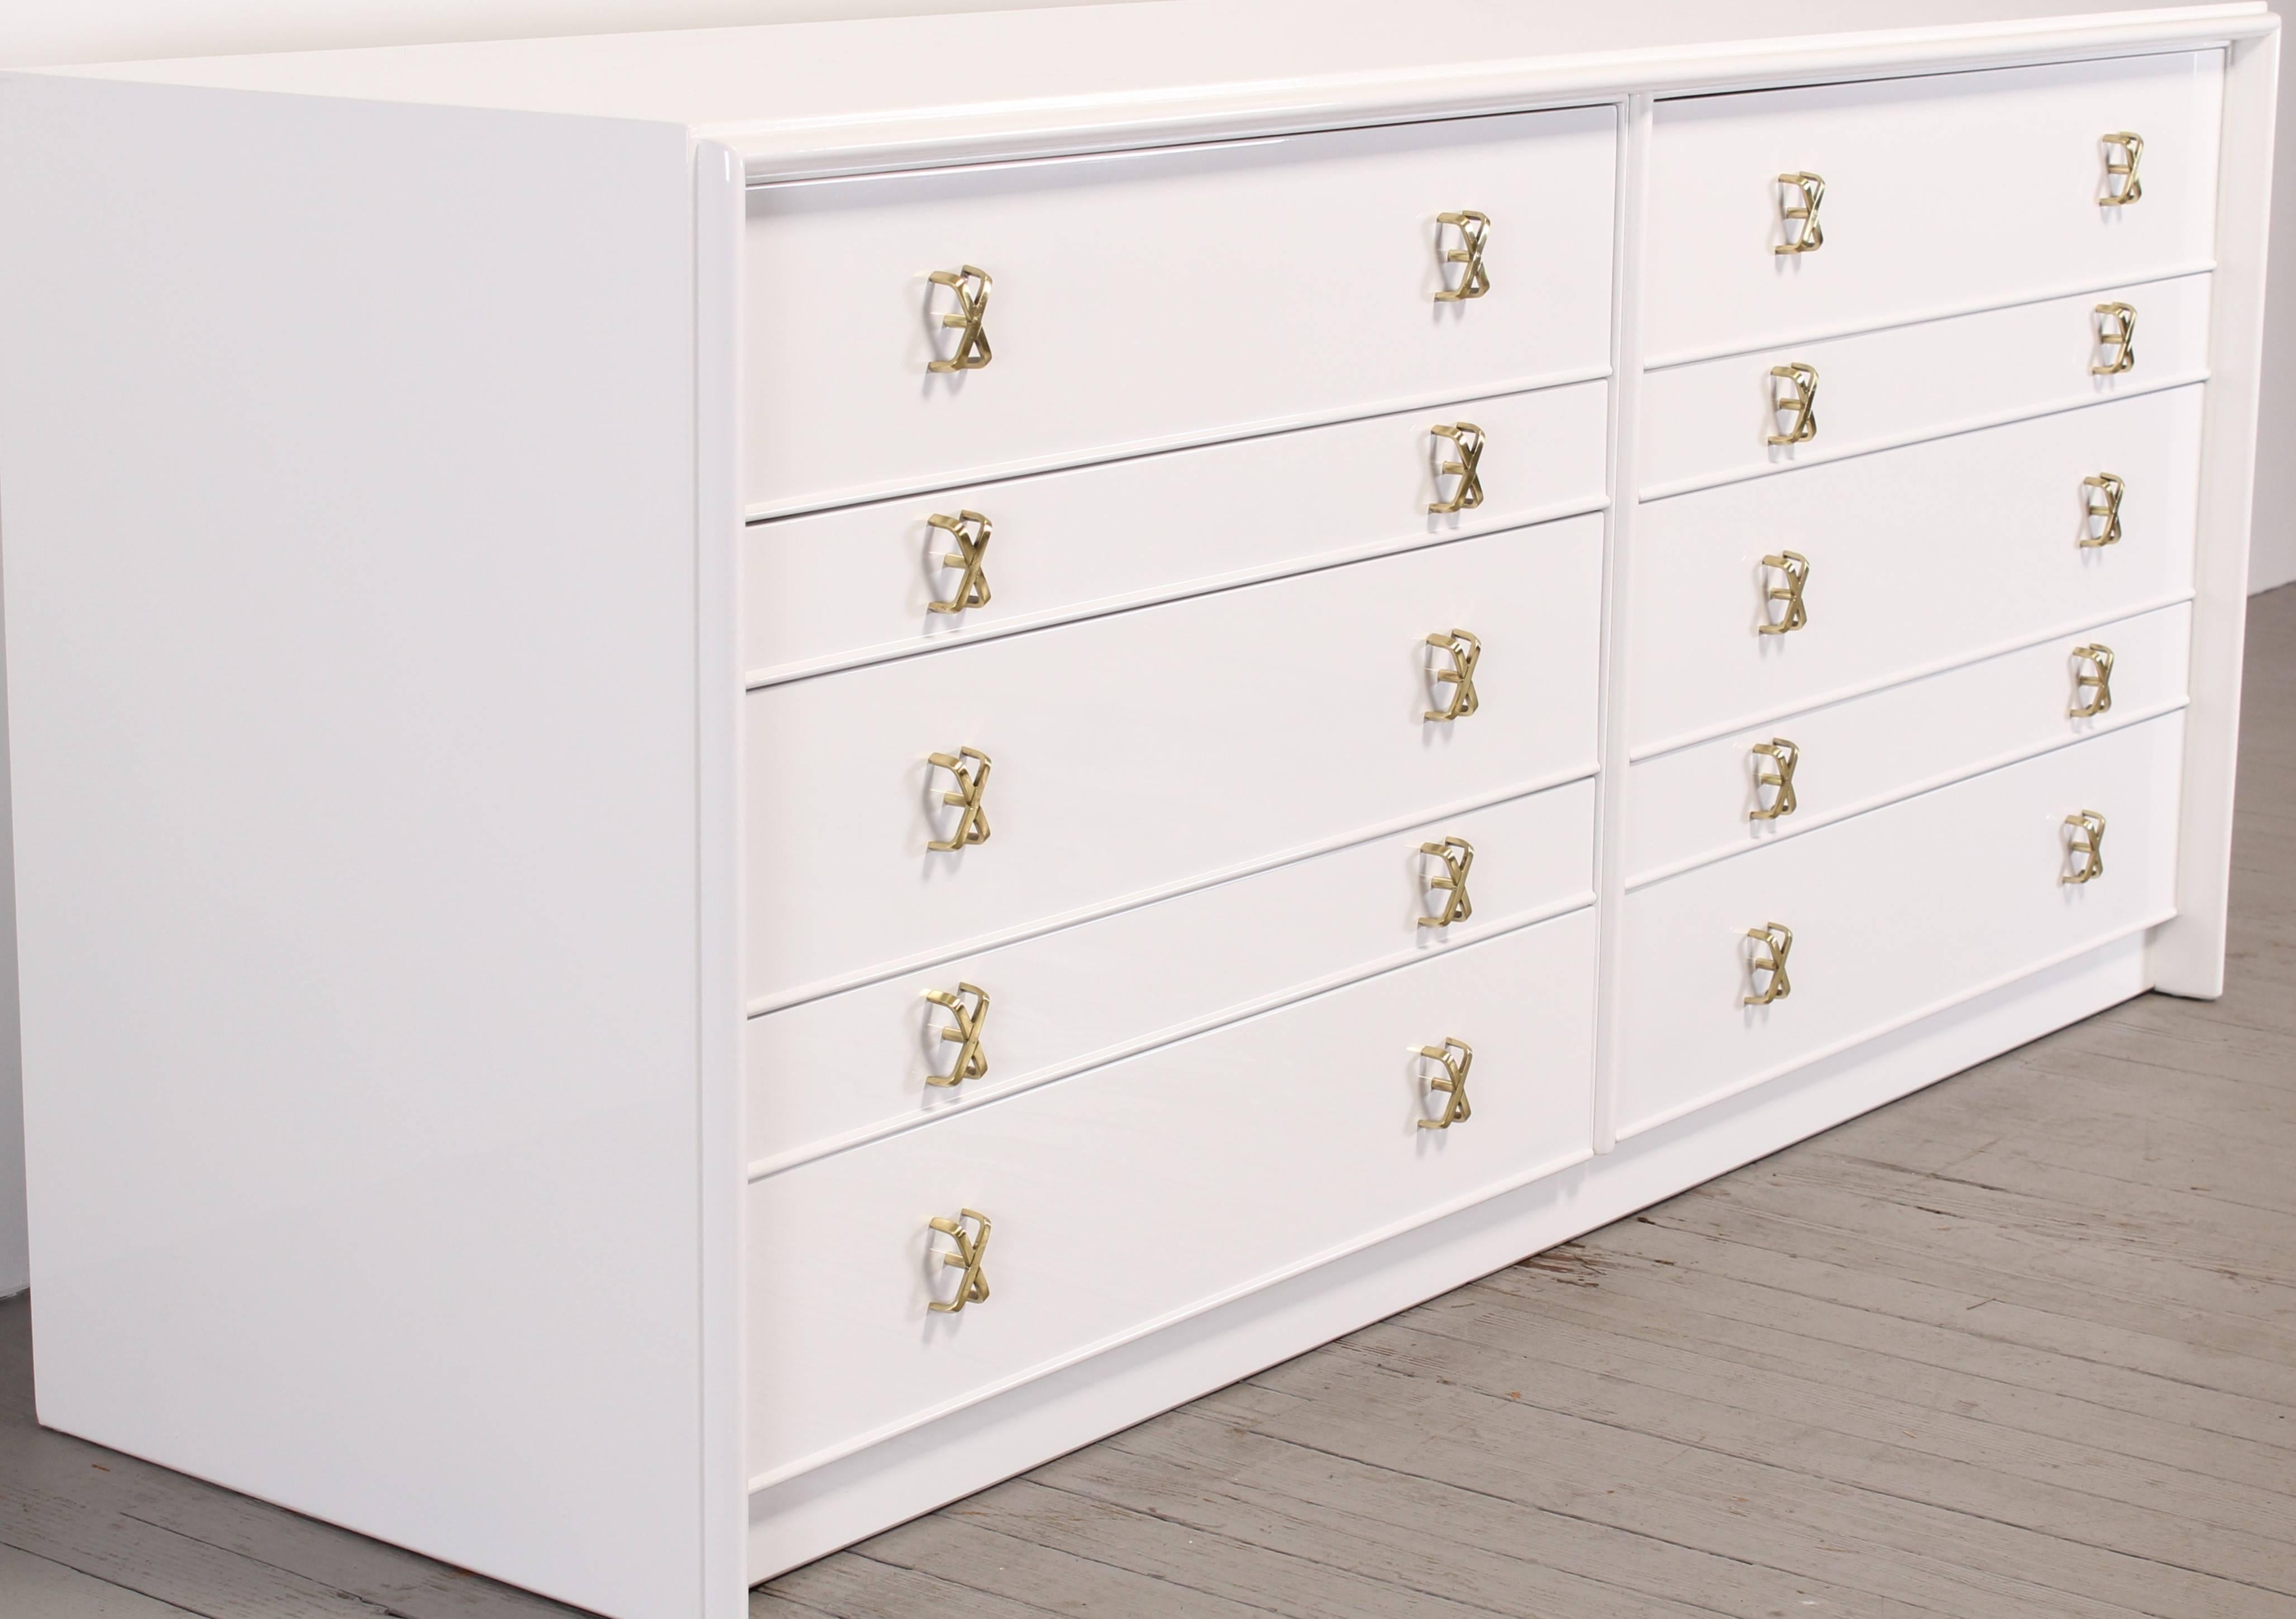 American Ten-Drawer Dresser with Brass X Pulls by Paul Frankl for Johnson Furniture Co.